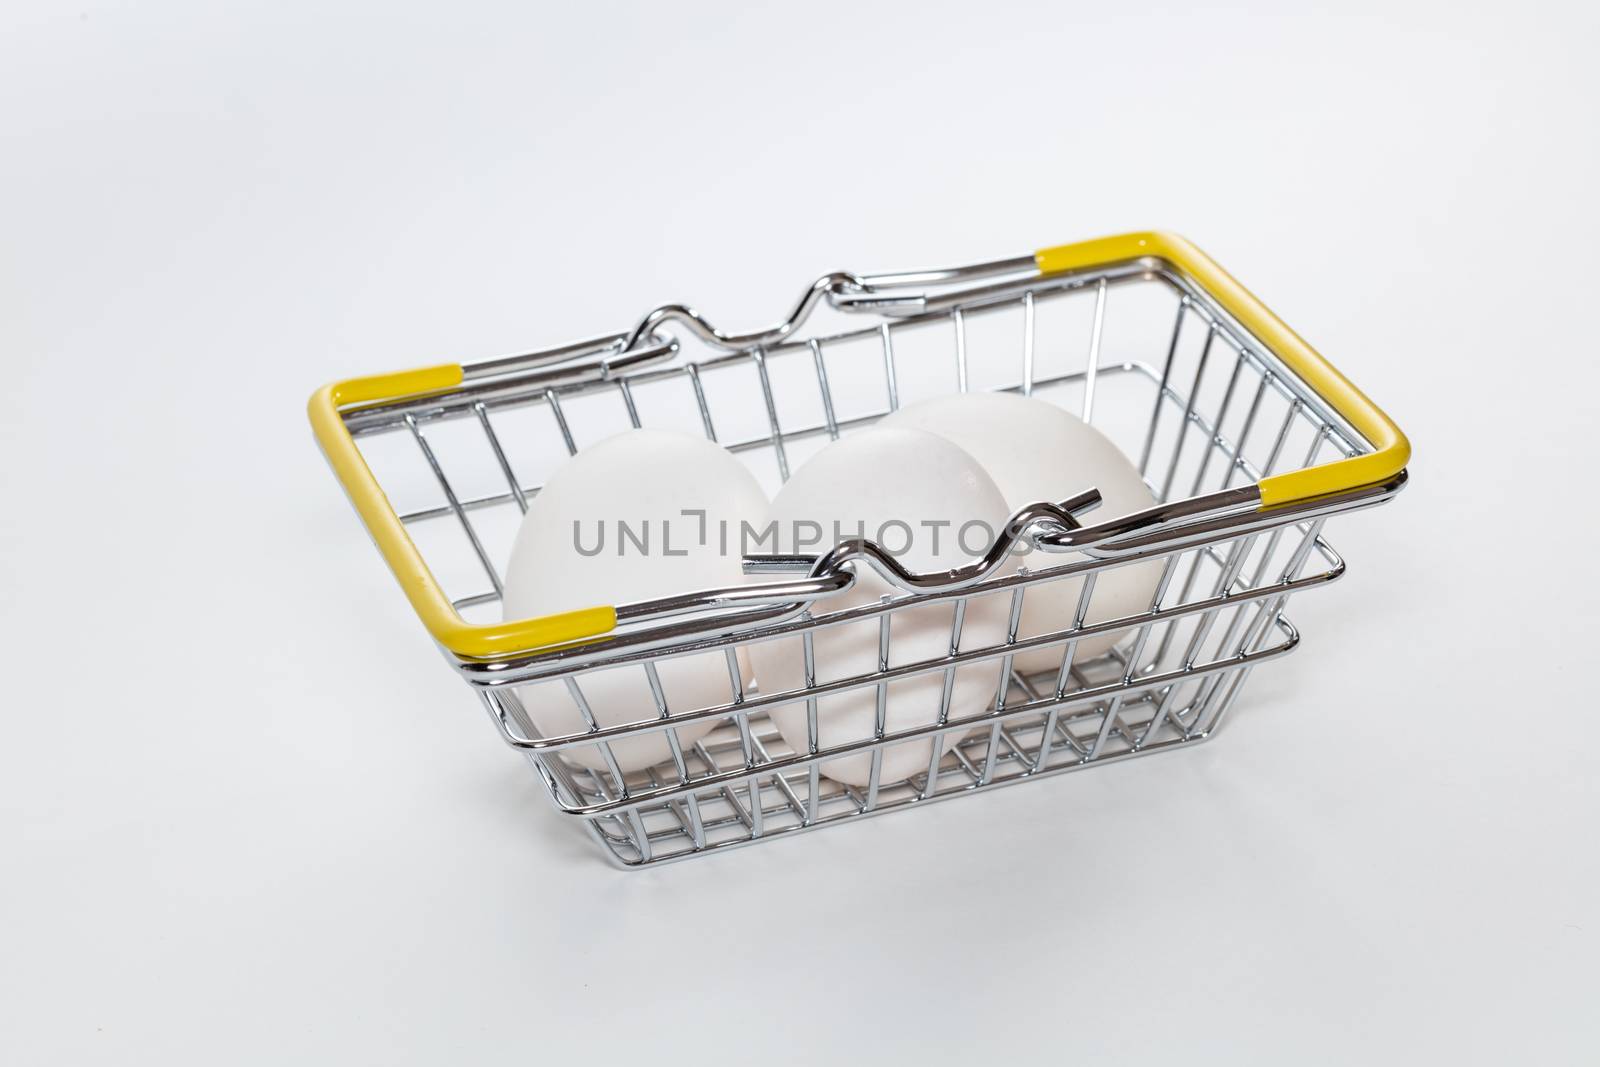 Fresh eggs in a shopping basket. High angle shot. Basket hands down. Shopping, purchasing, and food delivery concept. White background. Close up shot. Isolated.